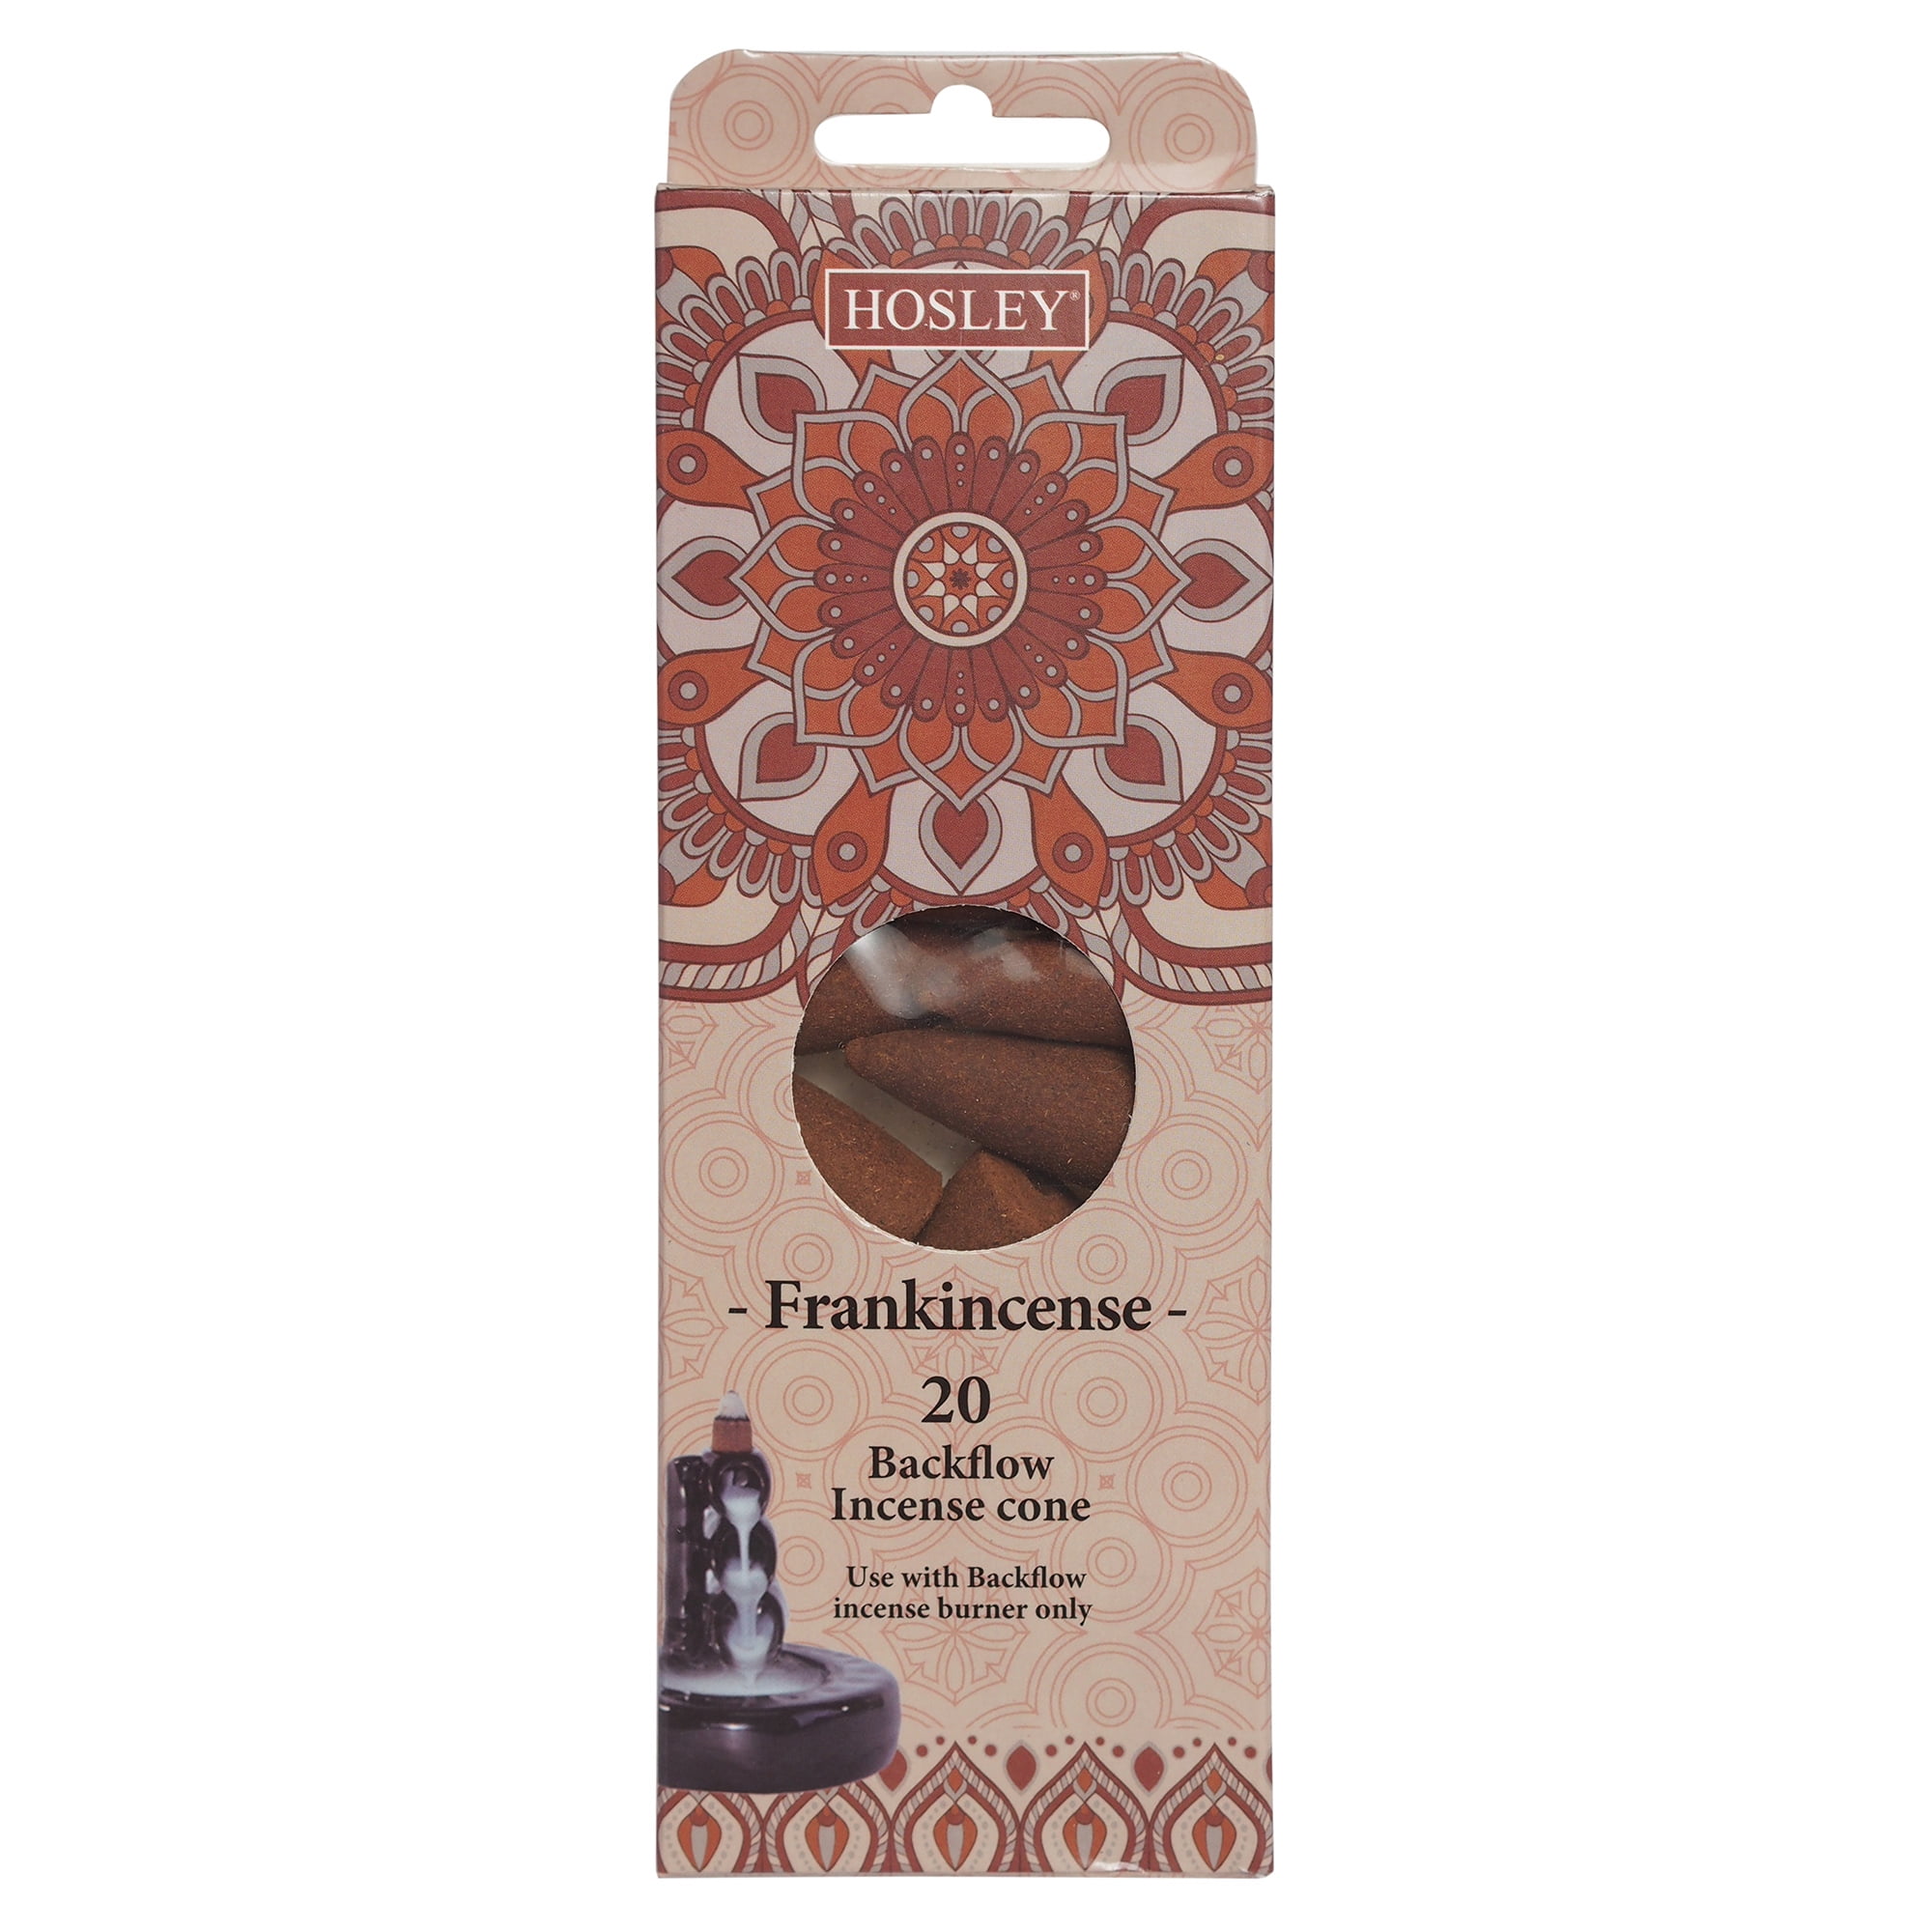 Hosley 20 pc. Highly Fragrance Frankincense Backflow Incense Cones